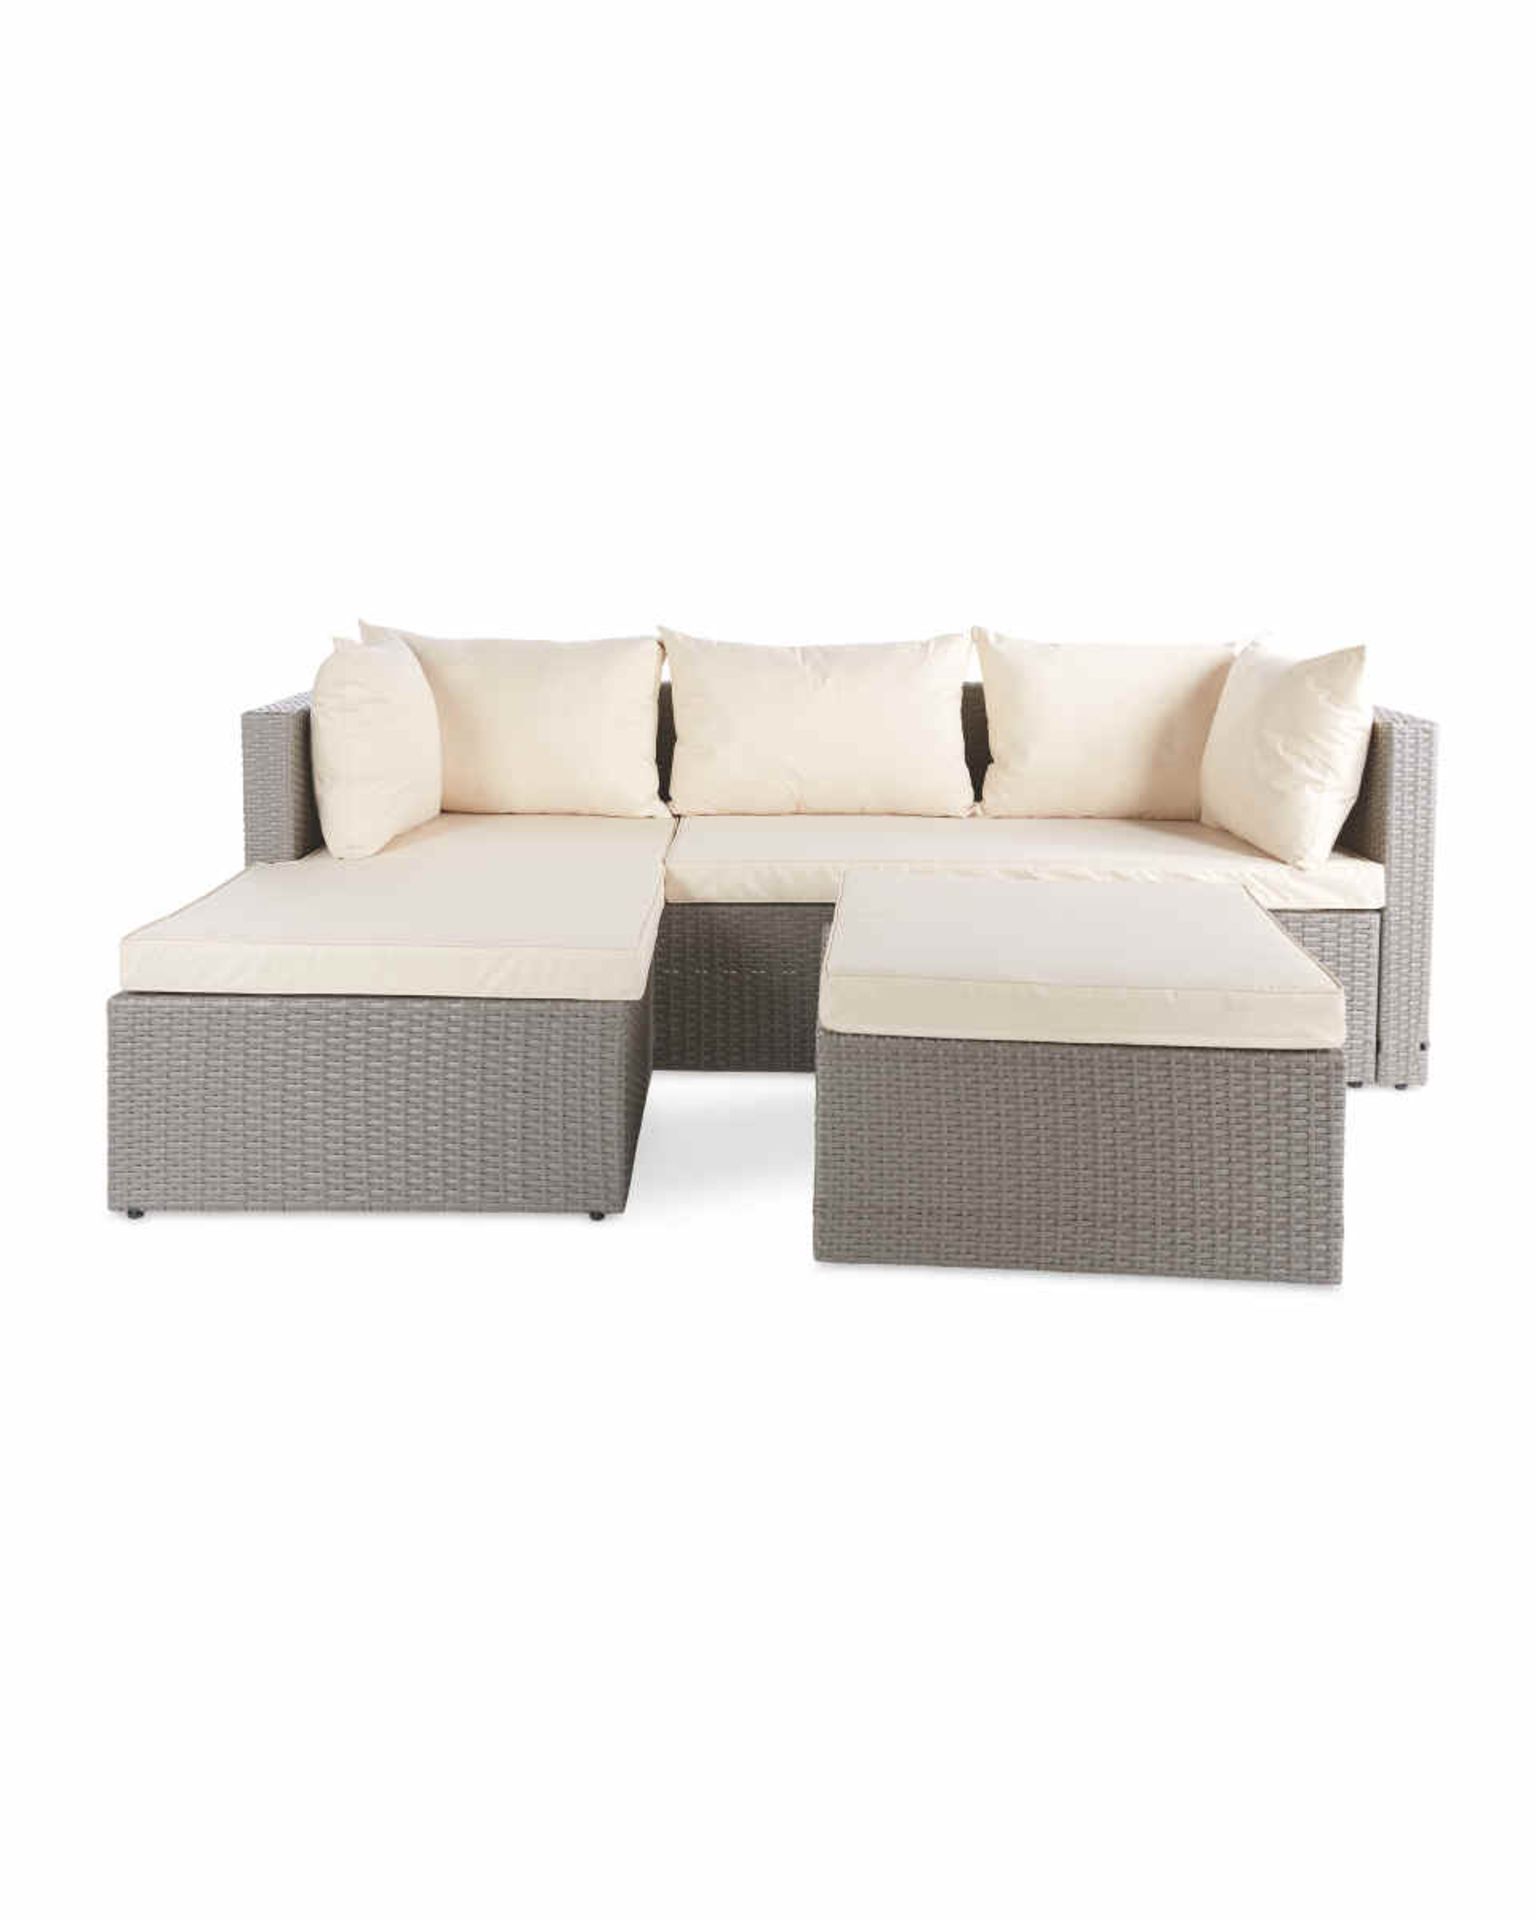 (2106487) Cream/Grey Rattan Sofa With Cover - Image 2 of 2